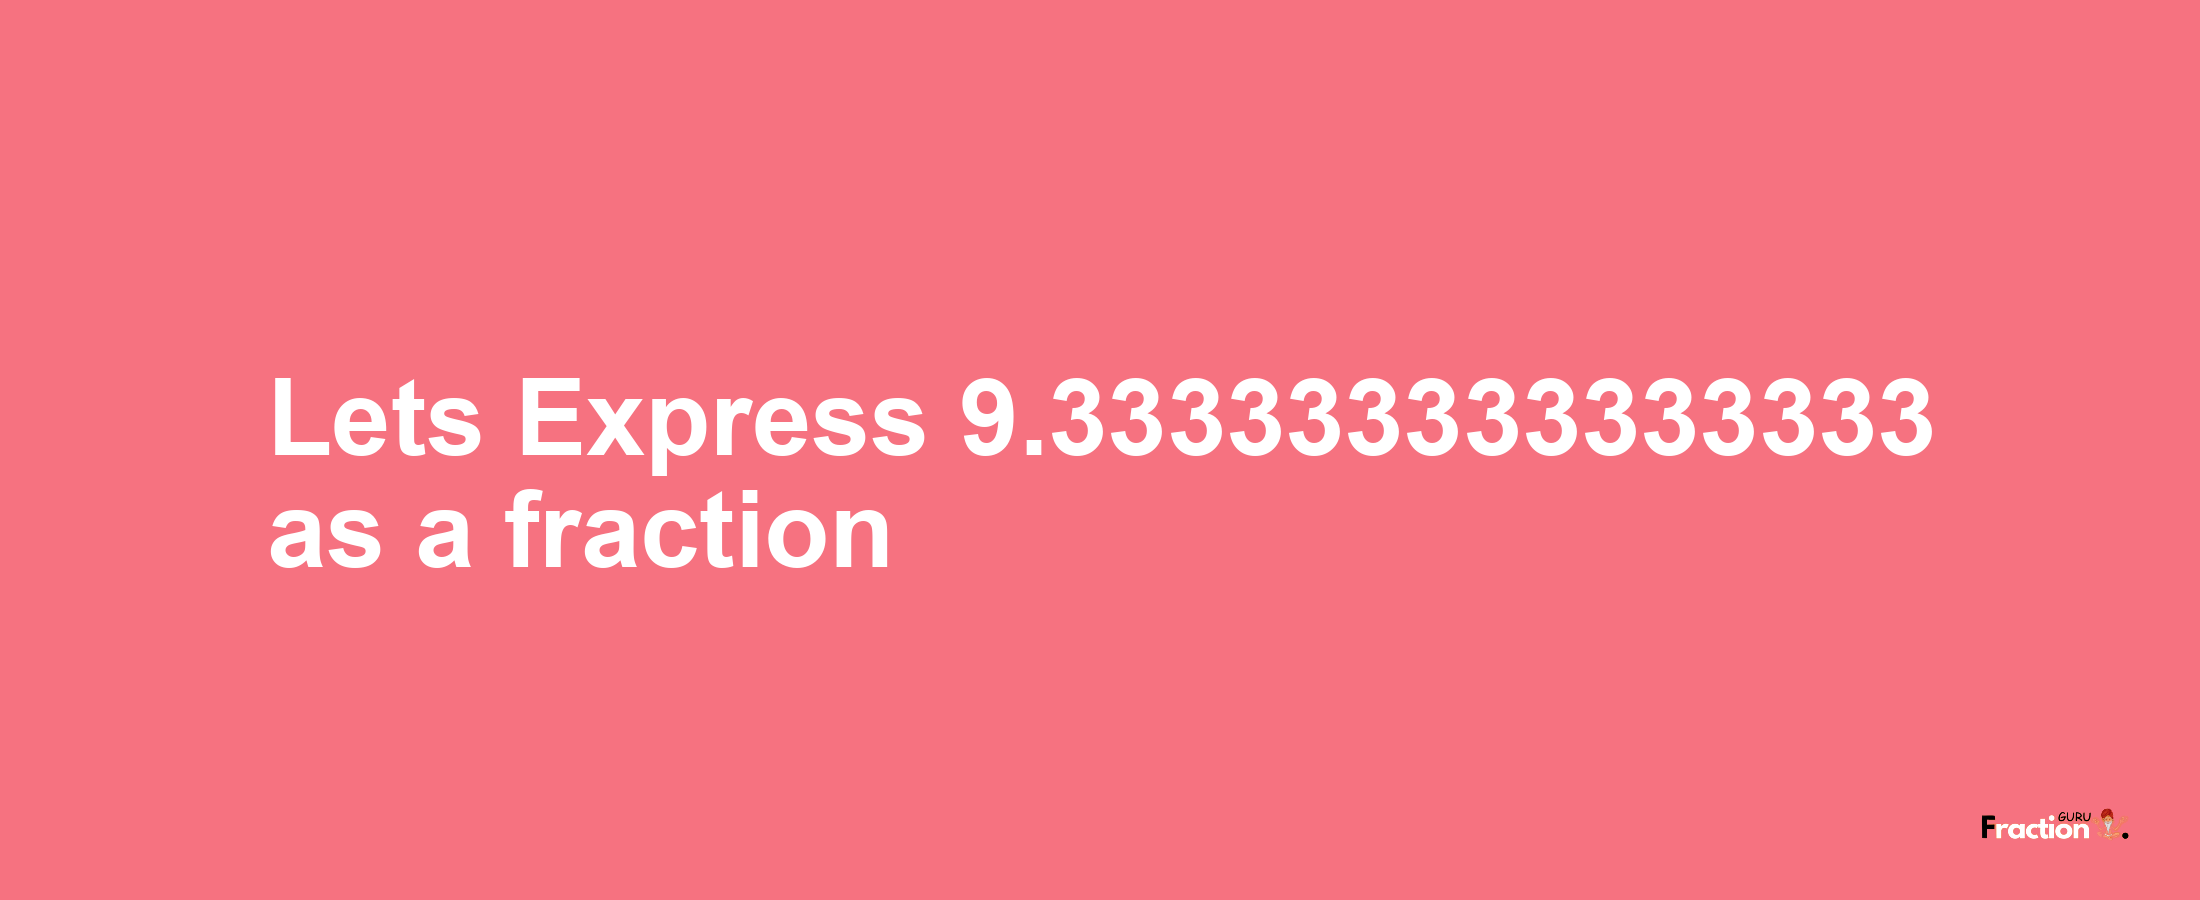 Lets Express 9.333333333333333 as afraction